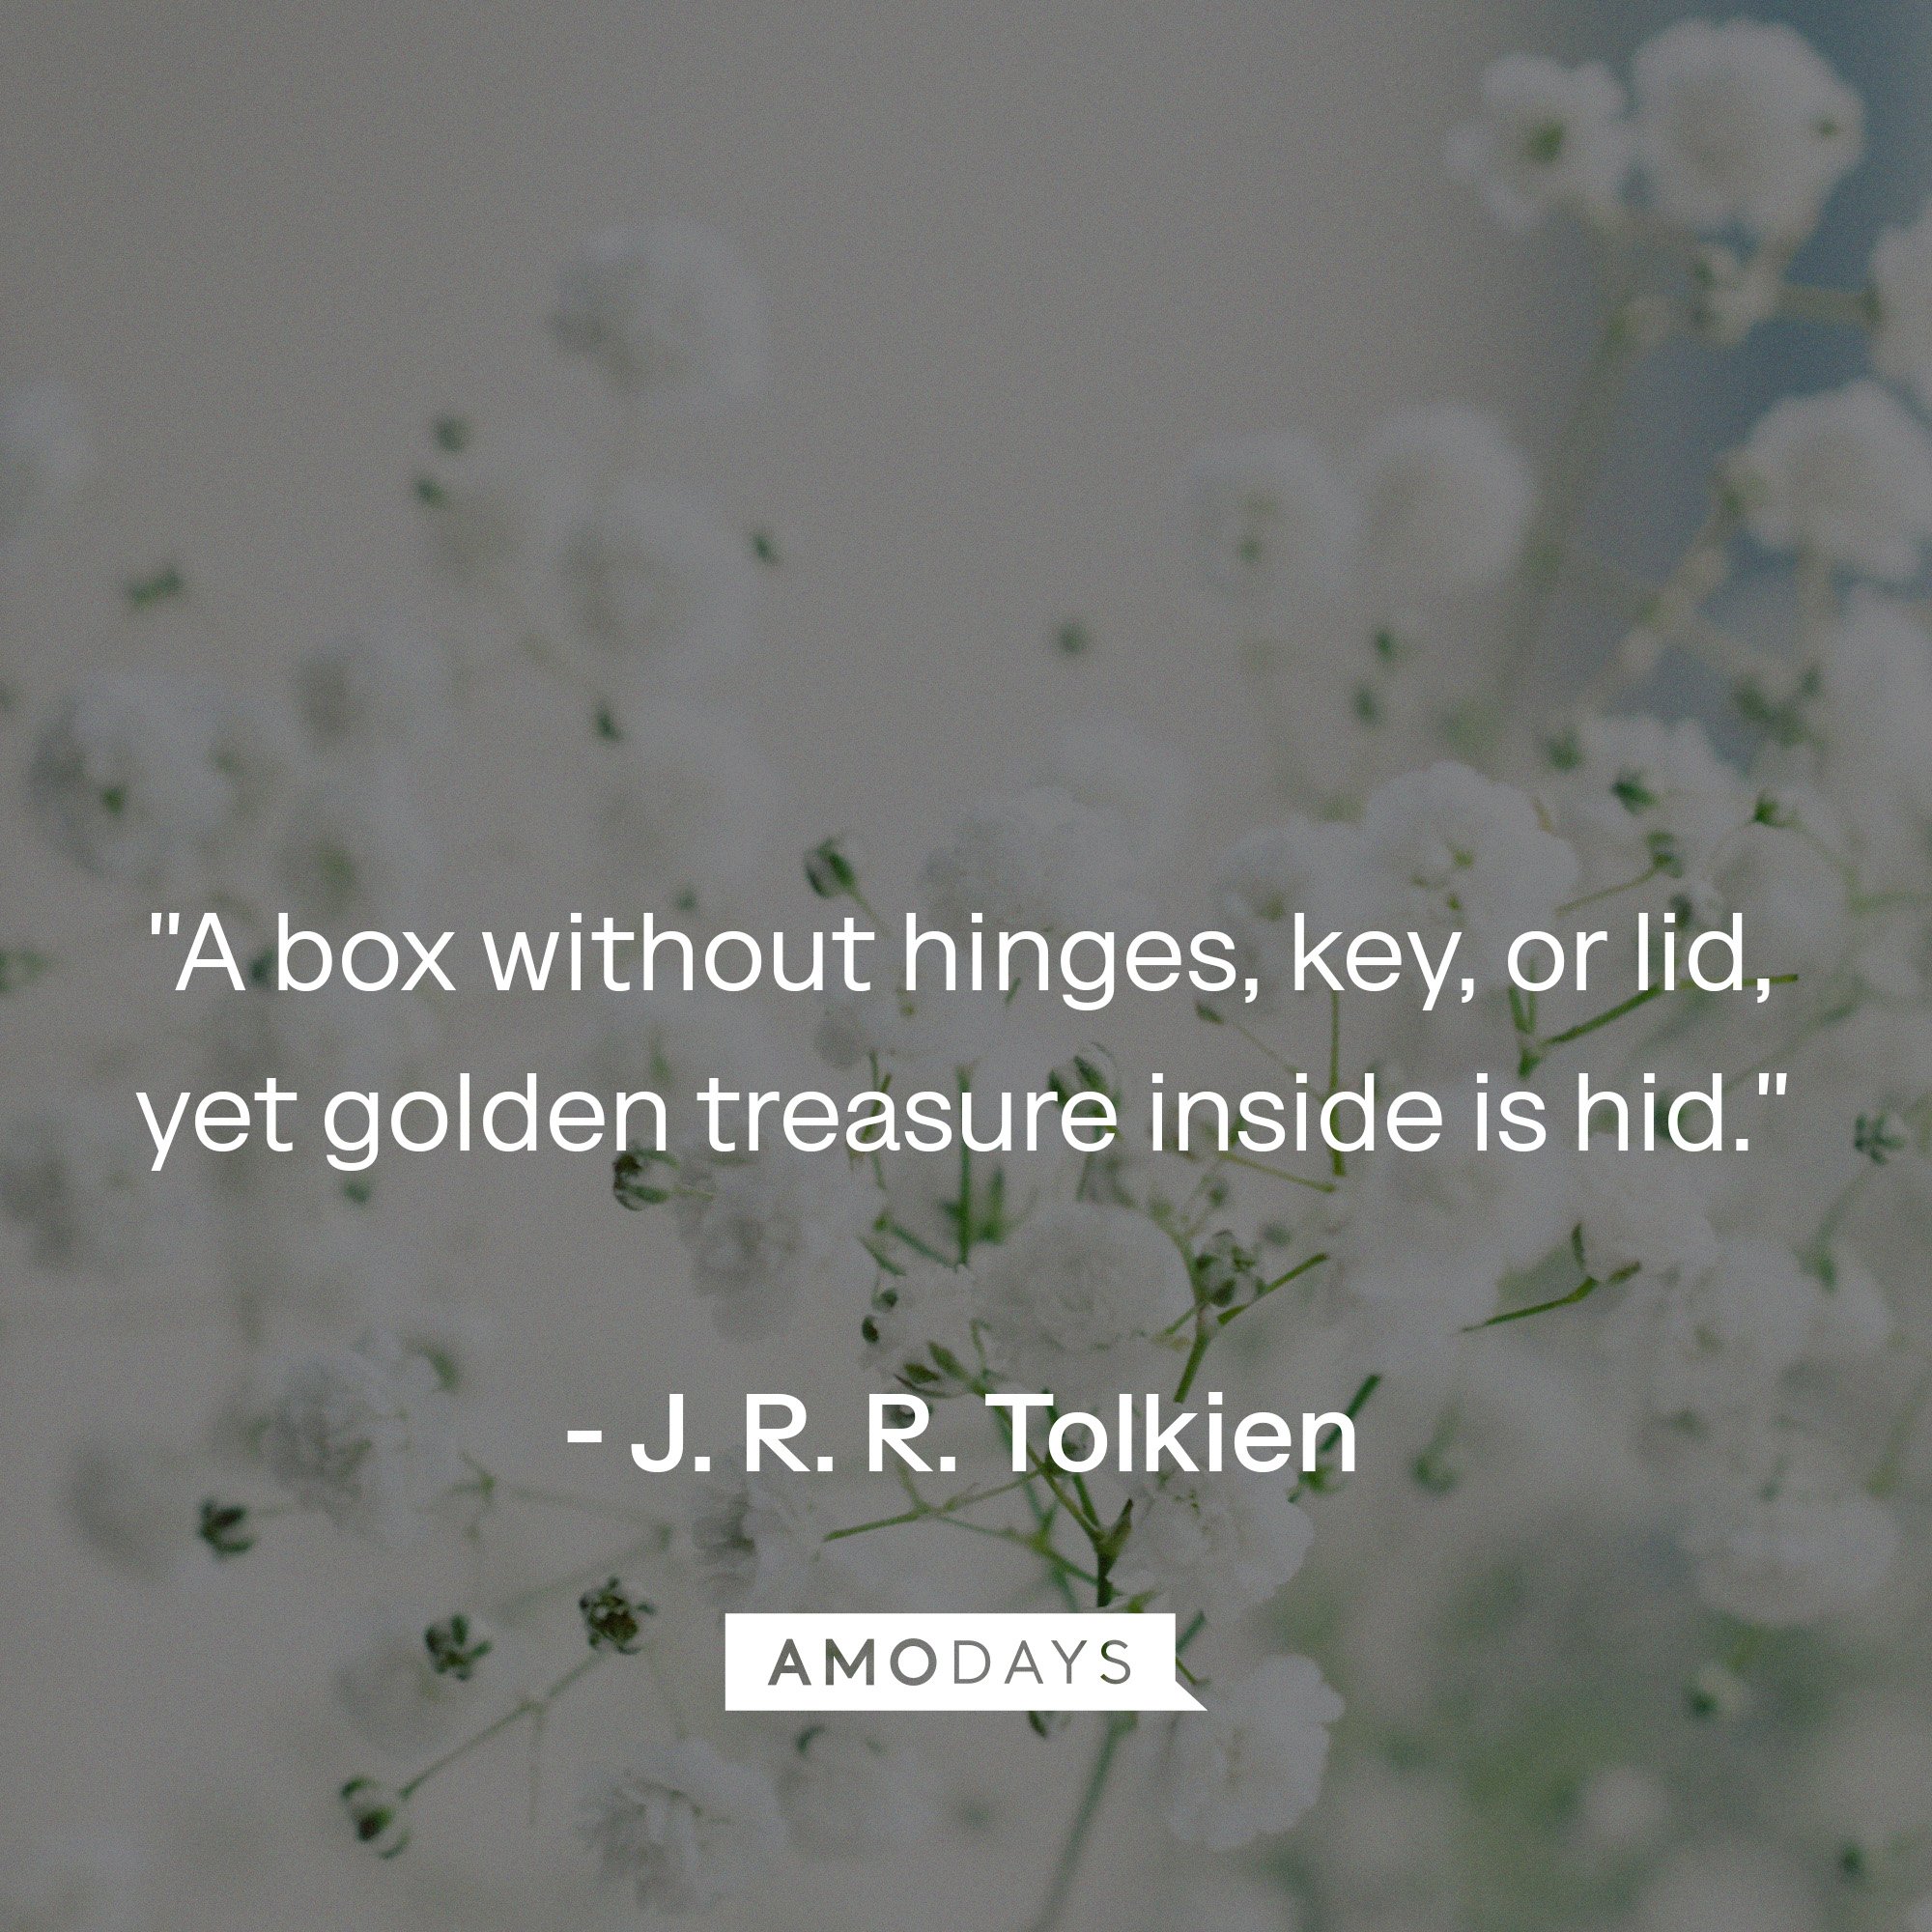  J. R. R. Tolkien's quotes: "A box without hinges, key, or lid, yet golden treasure inside is hid." | Image: AmoDays